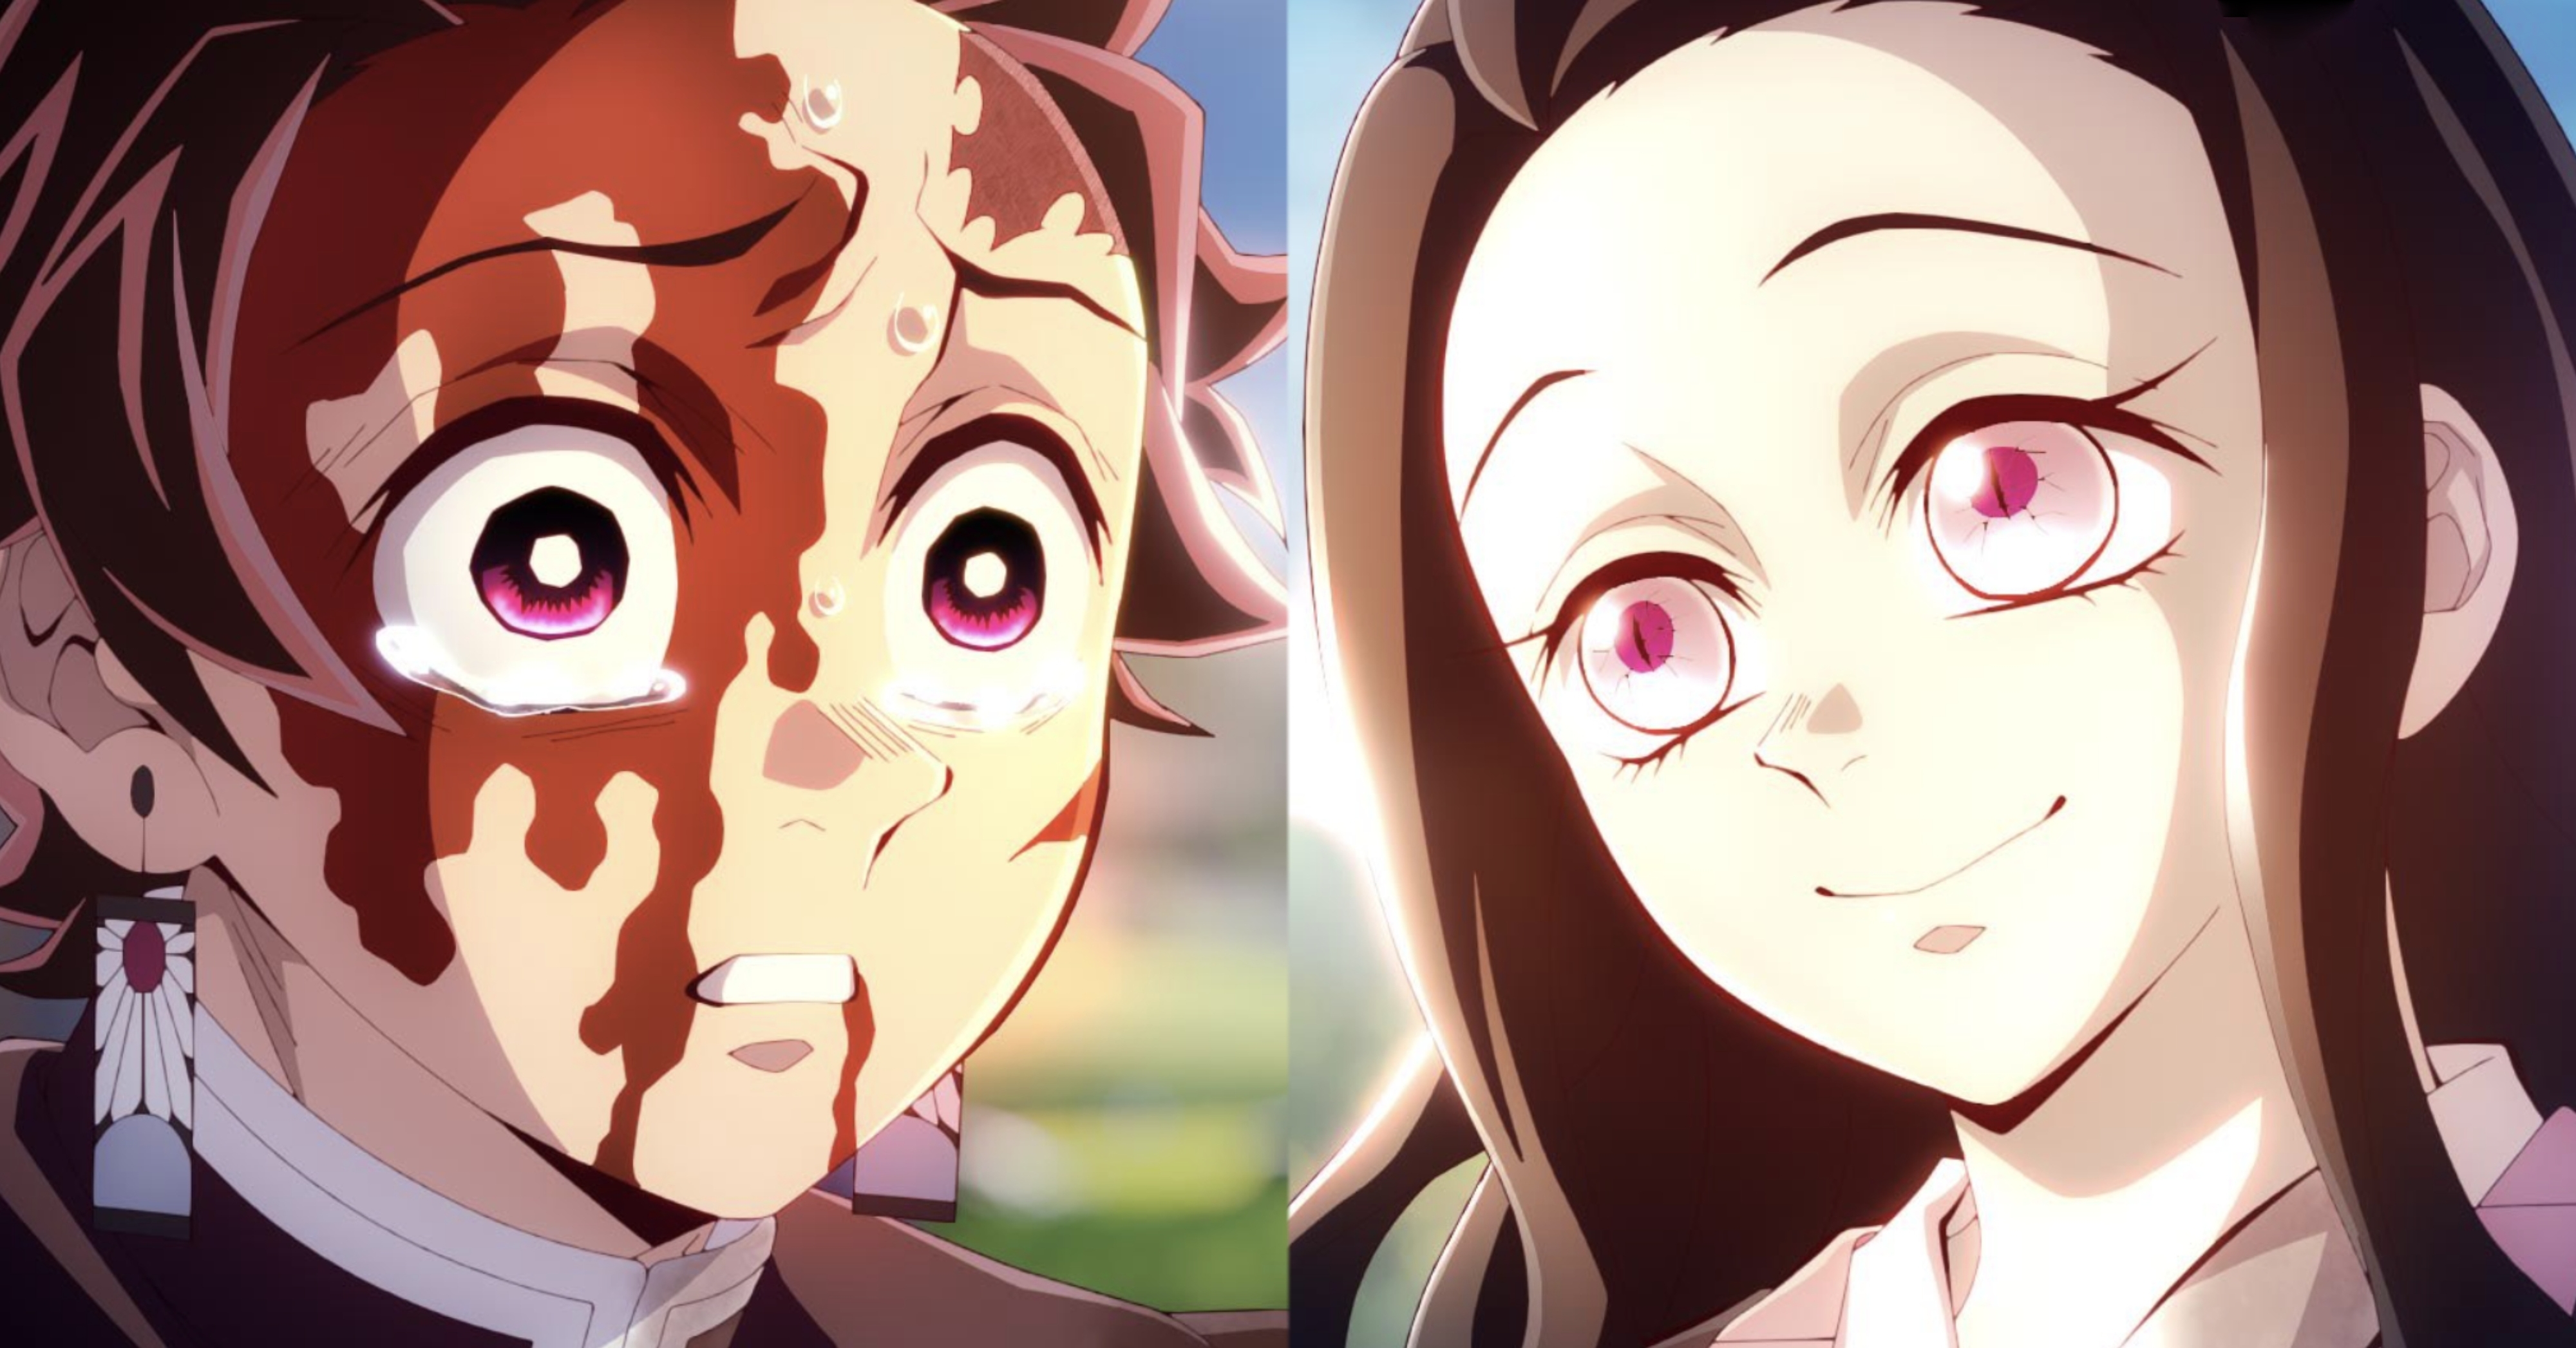 Left: A close up of Tanjiro crying while covered in blood; Right: Nezuko in her human form smiling in the sunlight while looking at Tanjiro